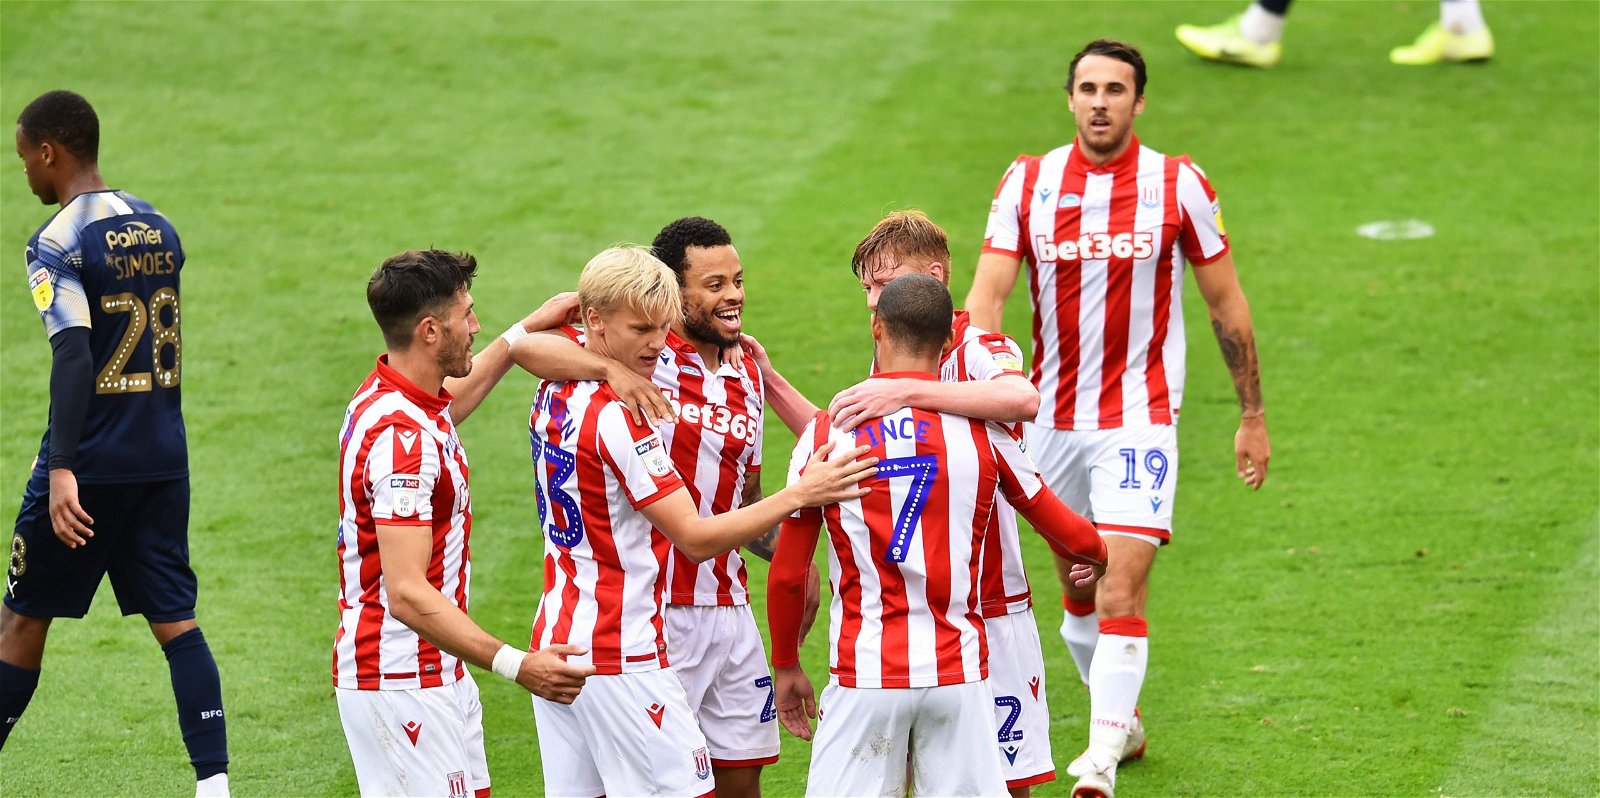 , Stoke City man wants to leave this summer and hopes German side takes a chance on him